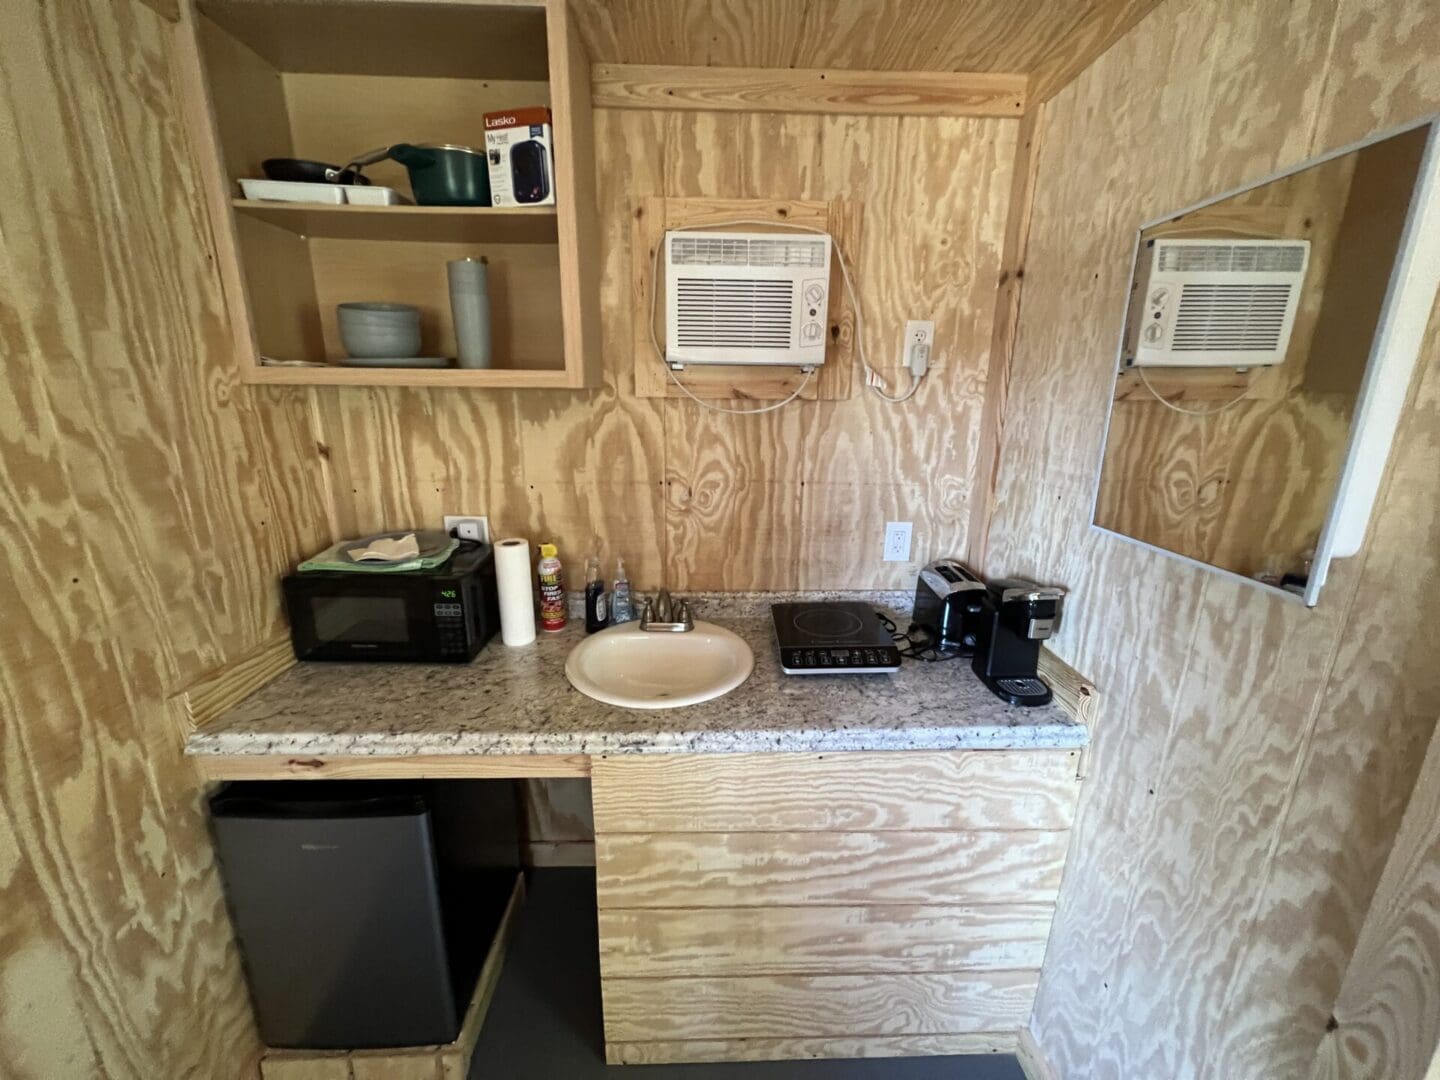 A small kitchen with a sink and microwave.